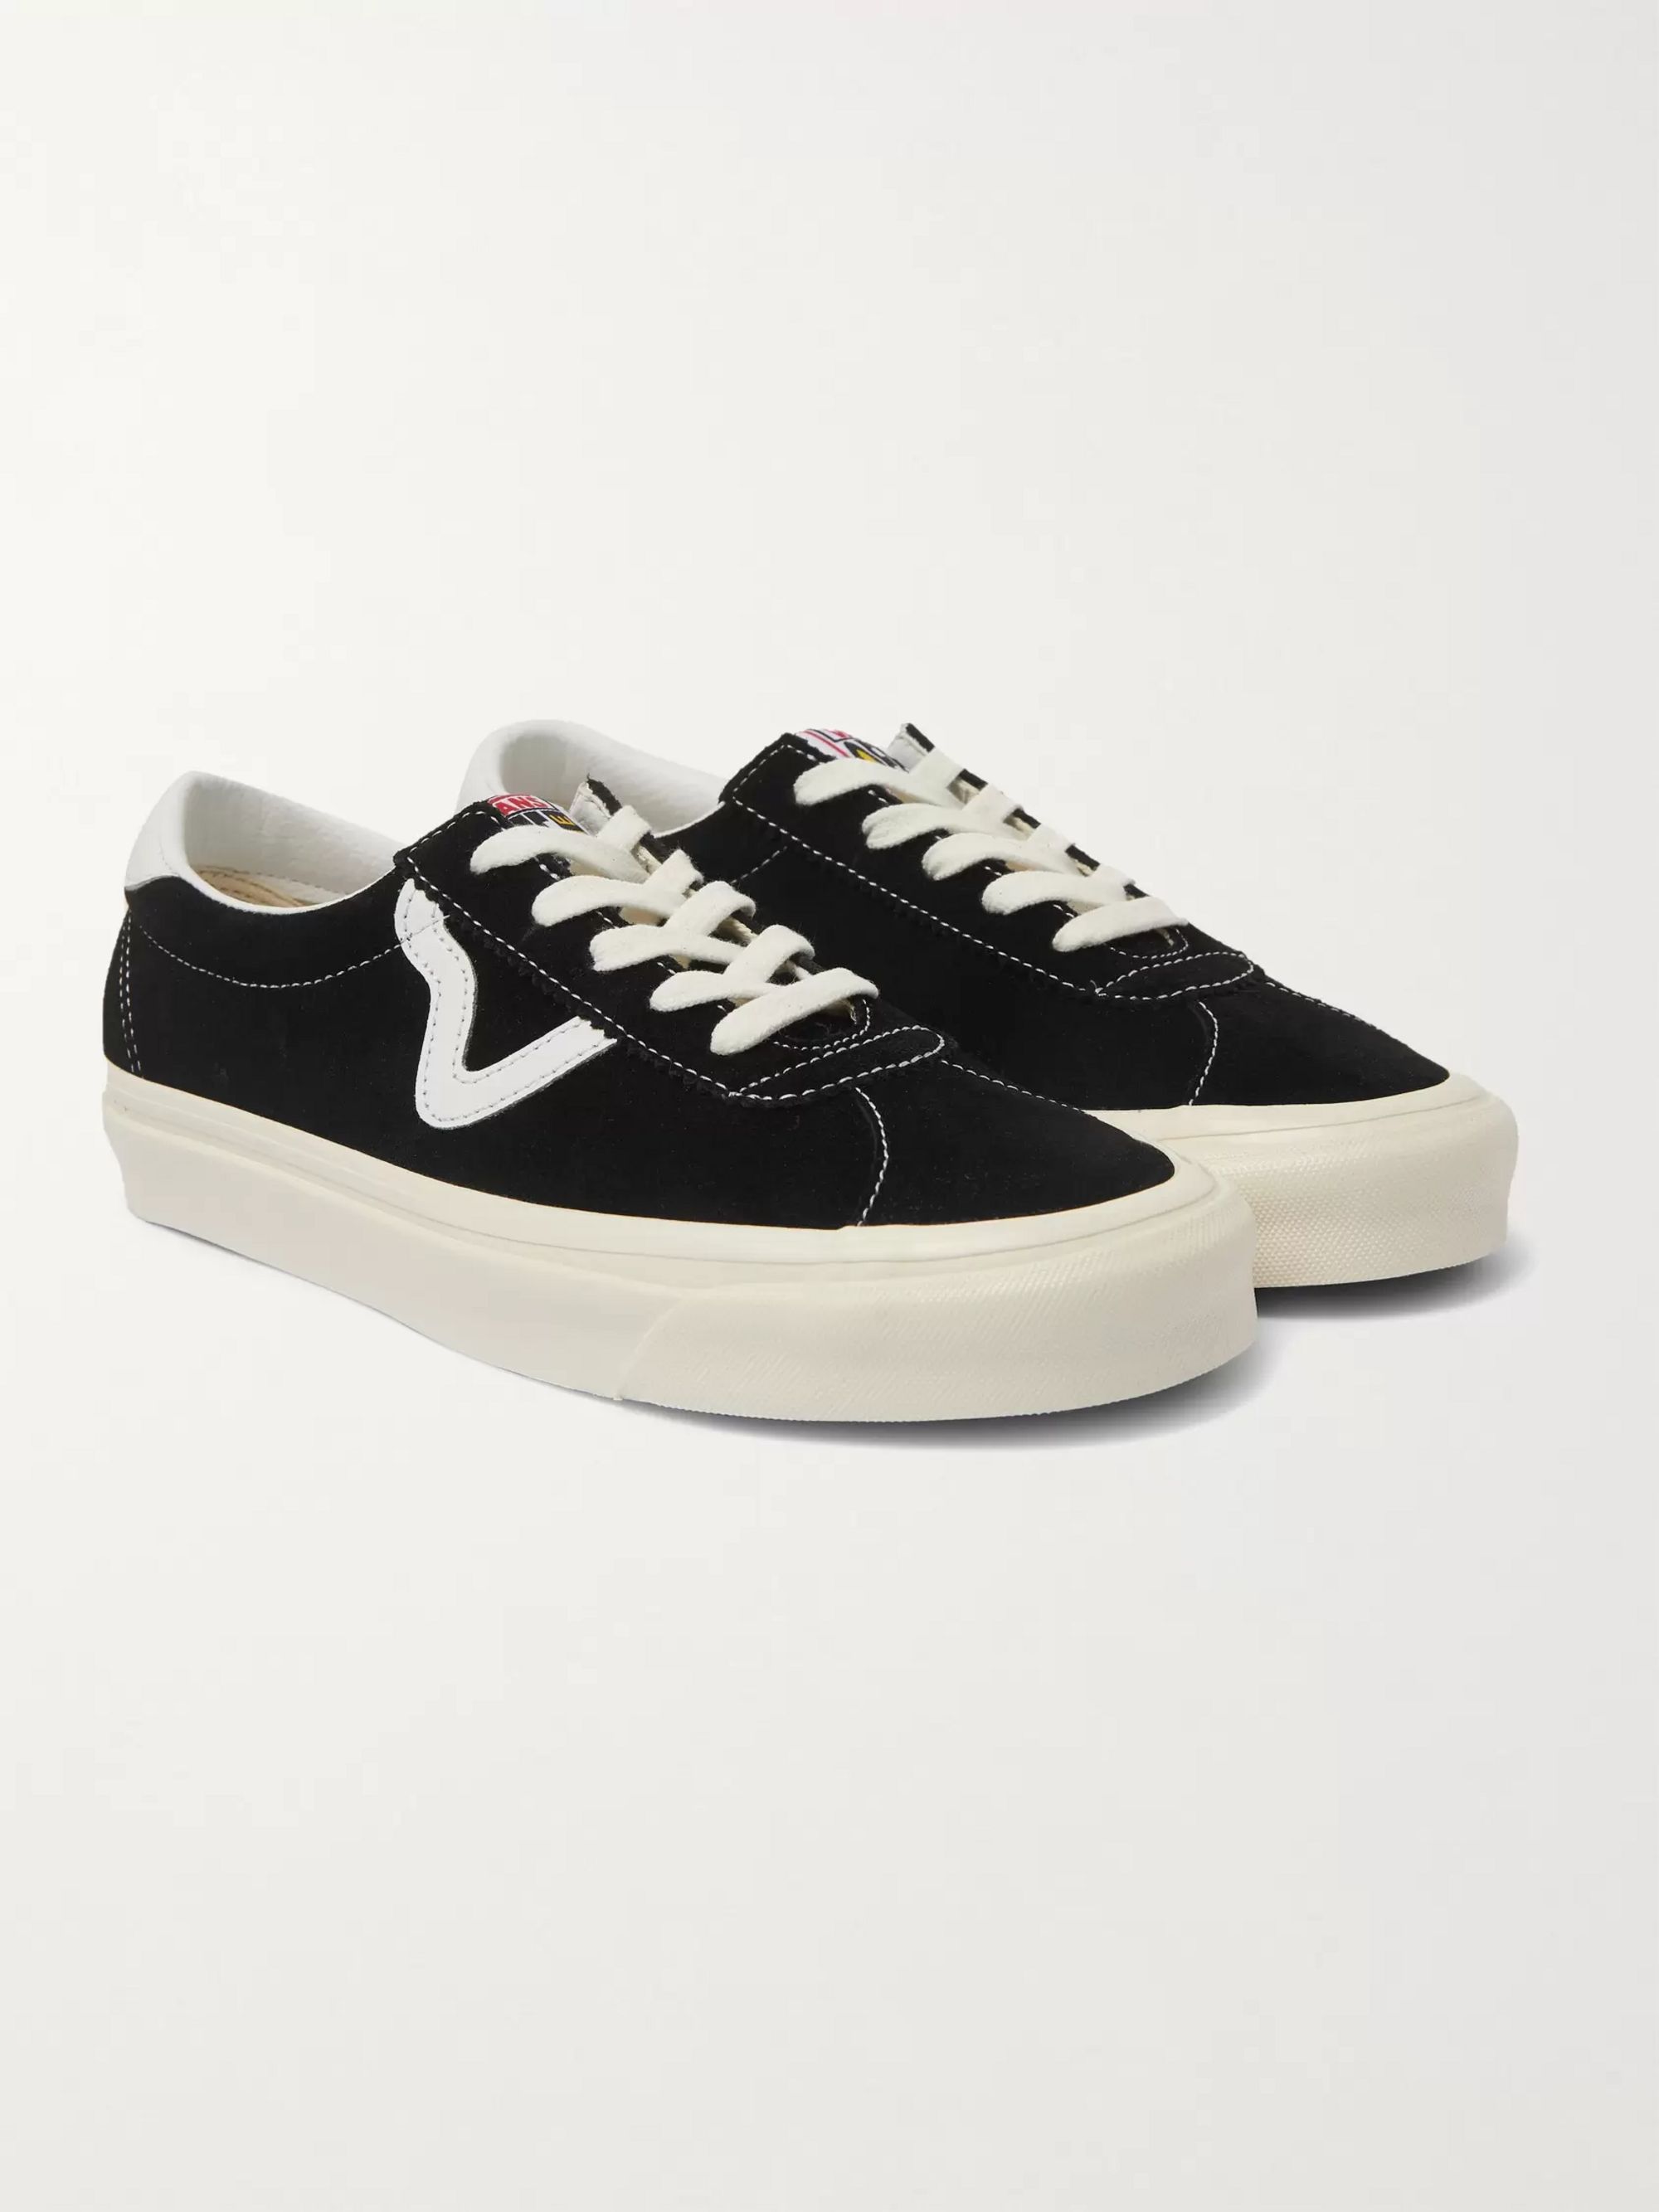 Black UA Anaheim Factory Style 73 DX Leather-Trimmed Suede Sneakers | Vans  | MR PORTER